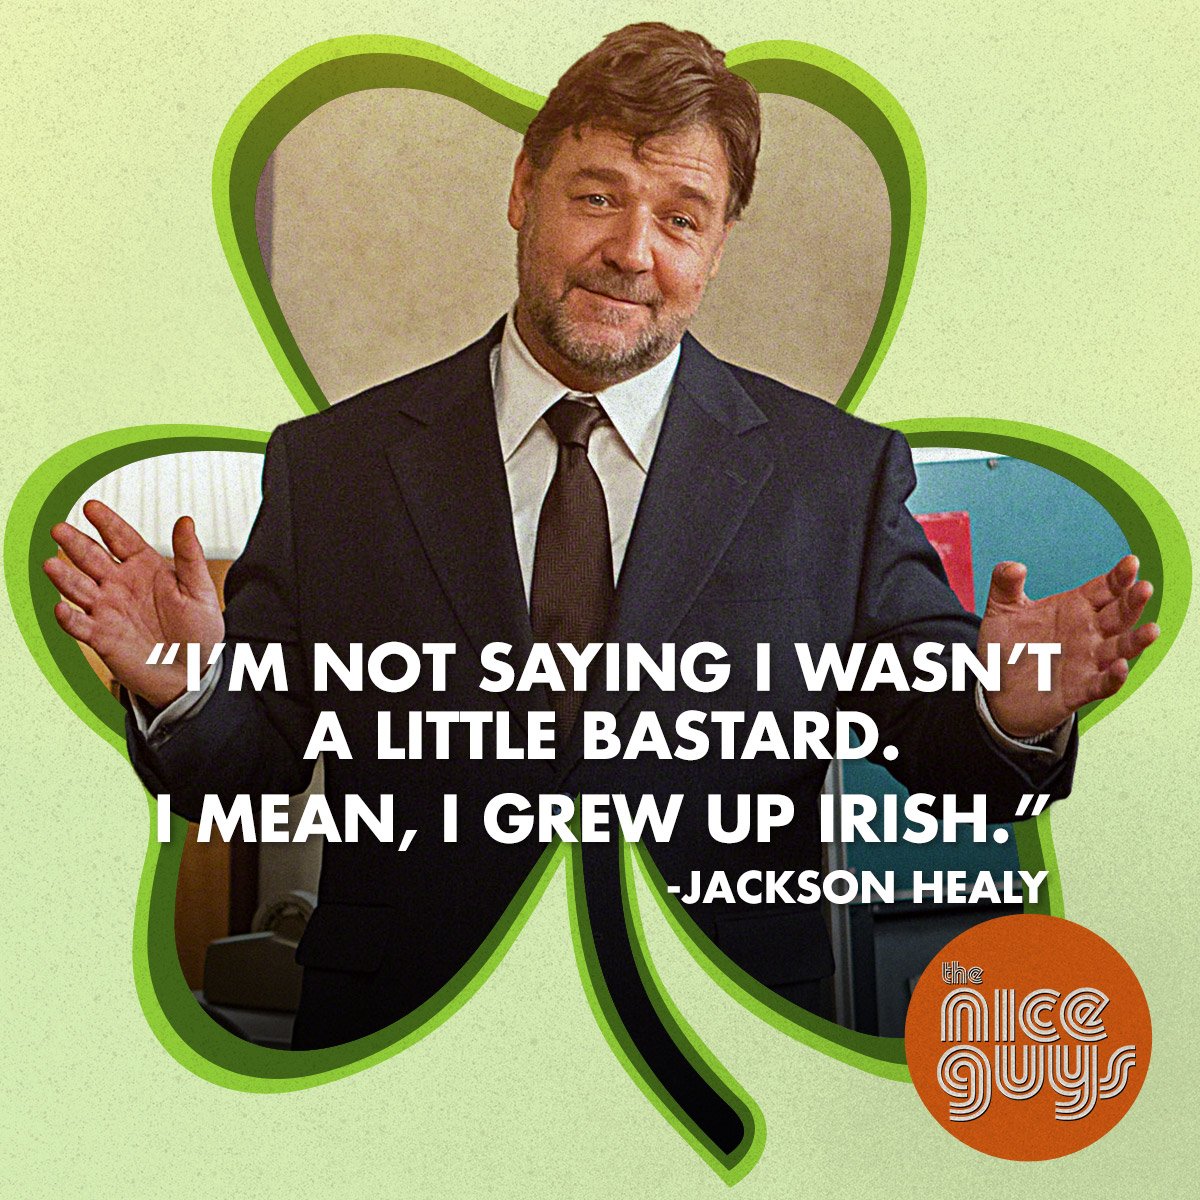 RT @theniceguys: Happy #StPatricksDay from our favorite Irish detective. https://t.co/CQ6PWYlxTN